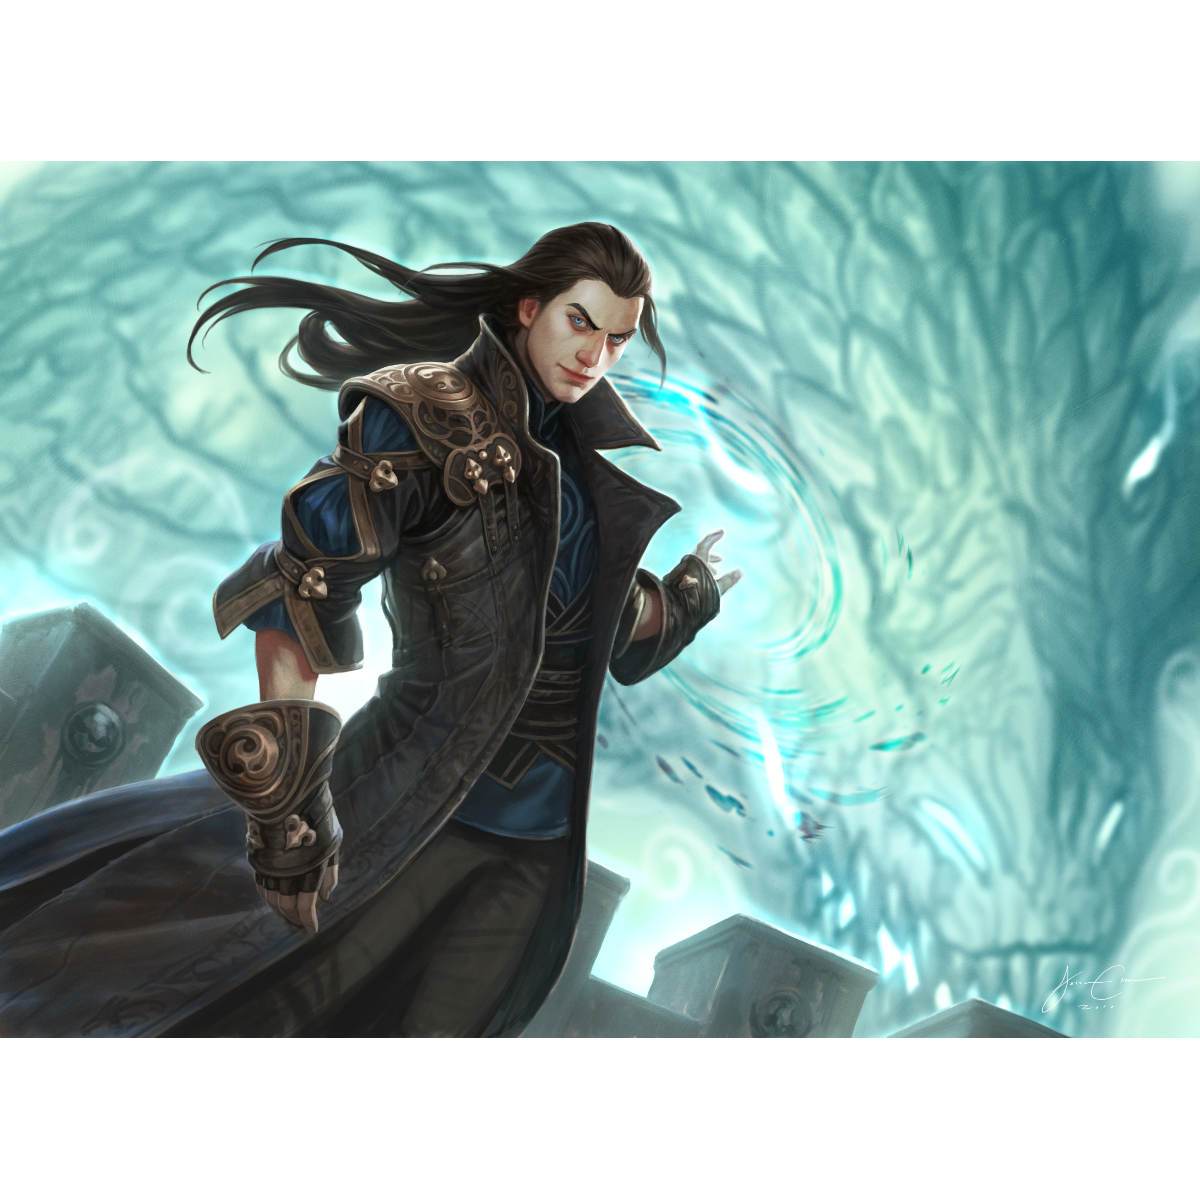 Lord of the Unreal Print - Print - Original Magic Art - Accessories for Magic the Gathering and other card games